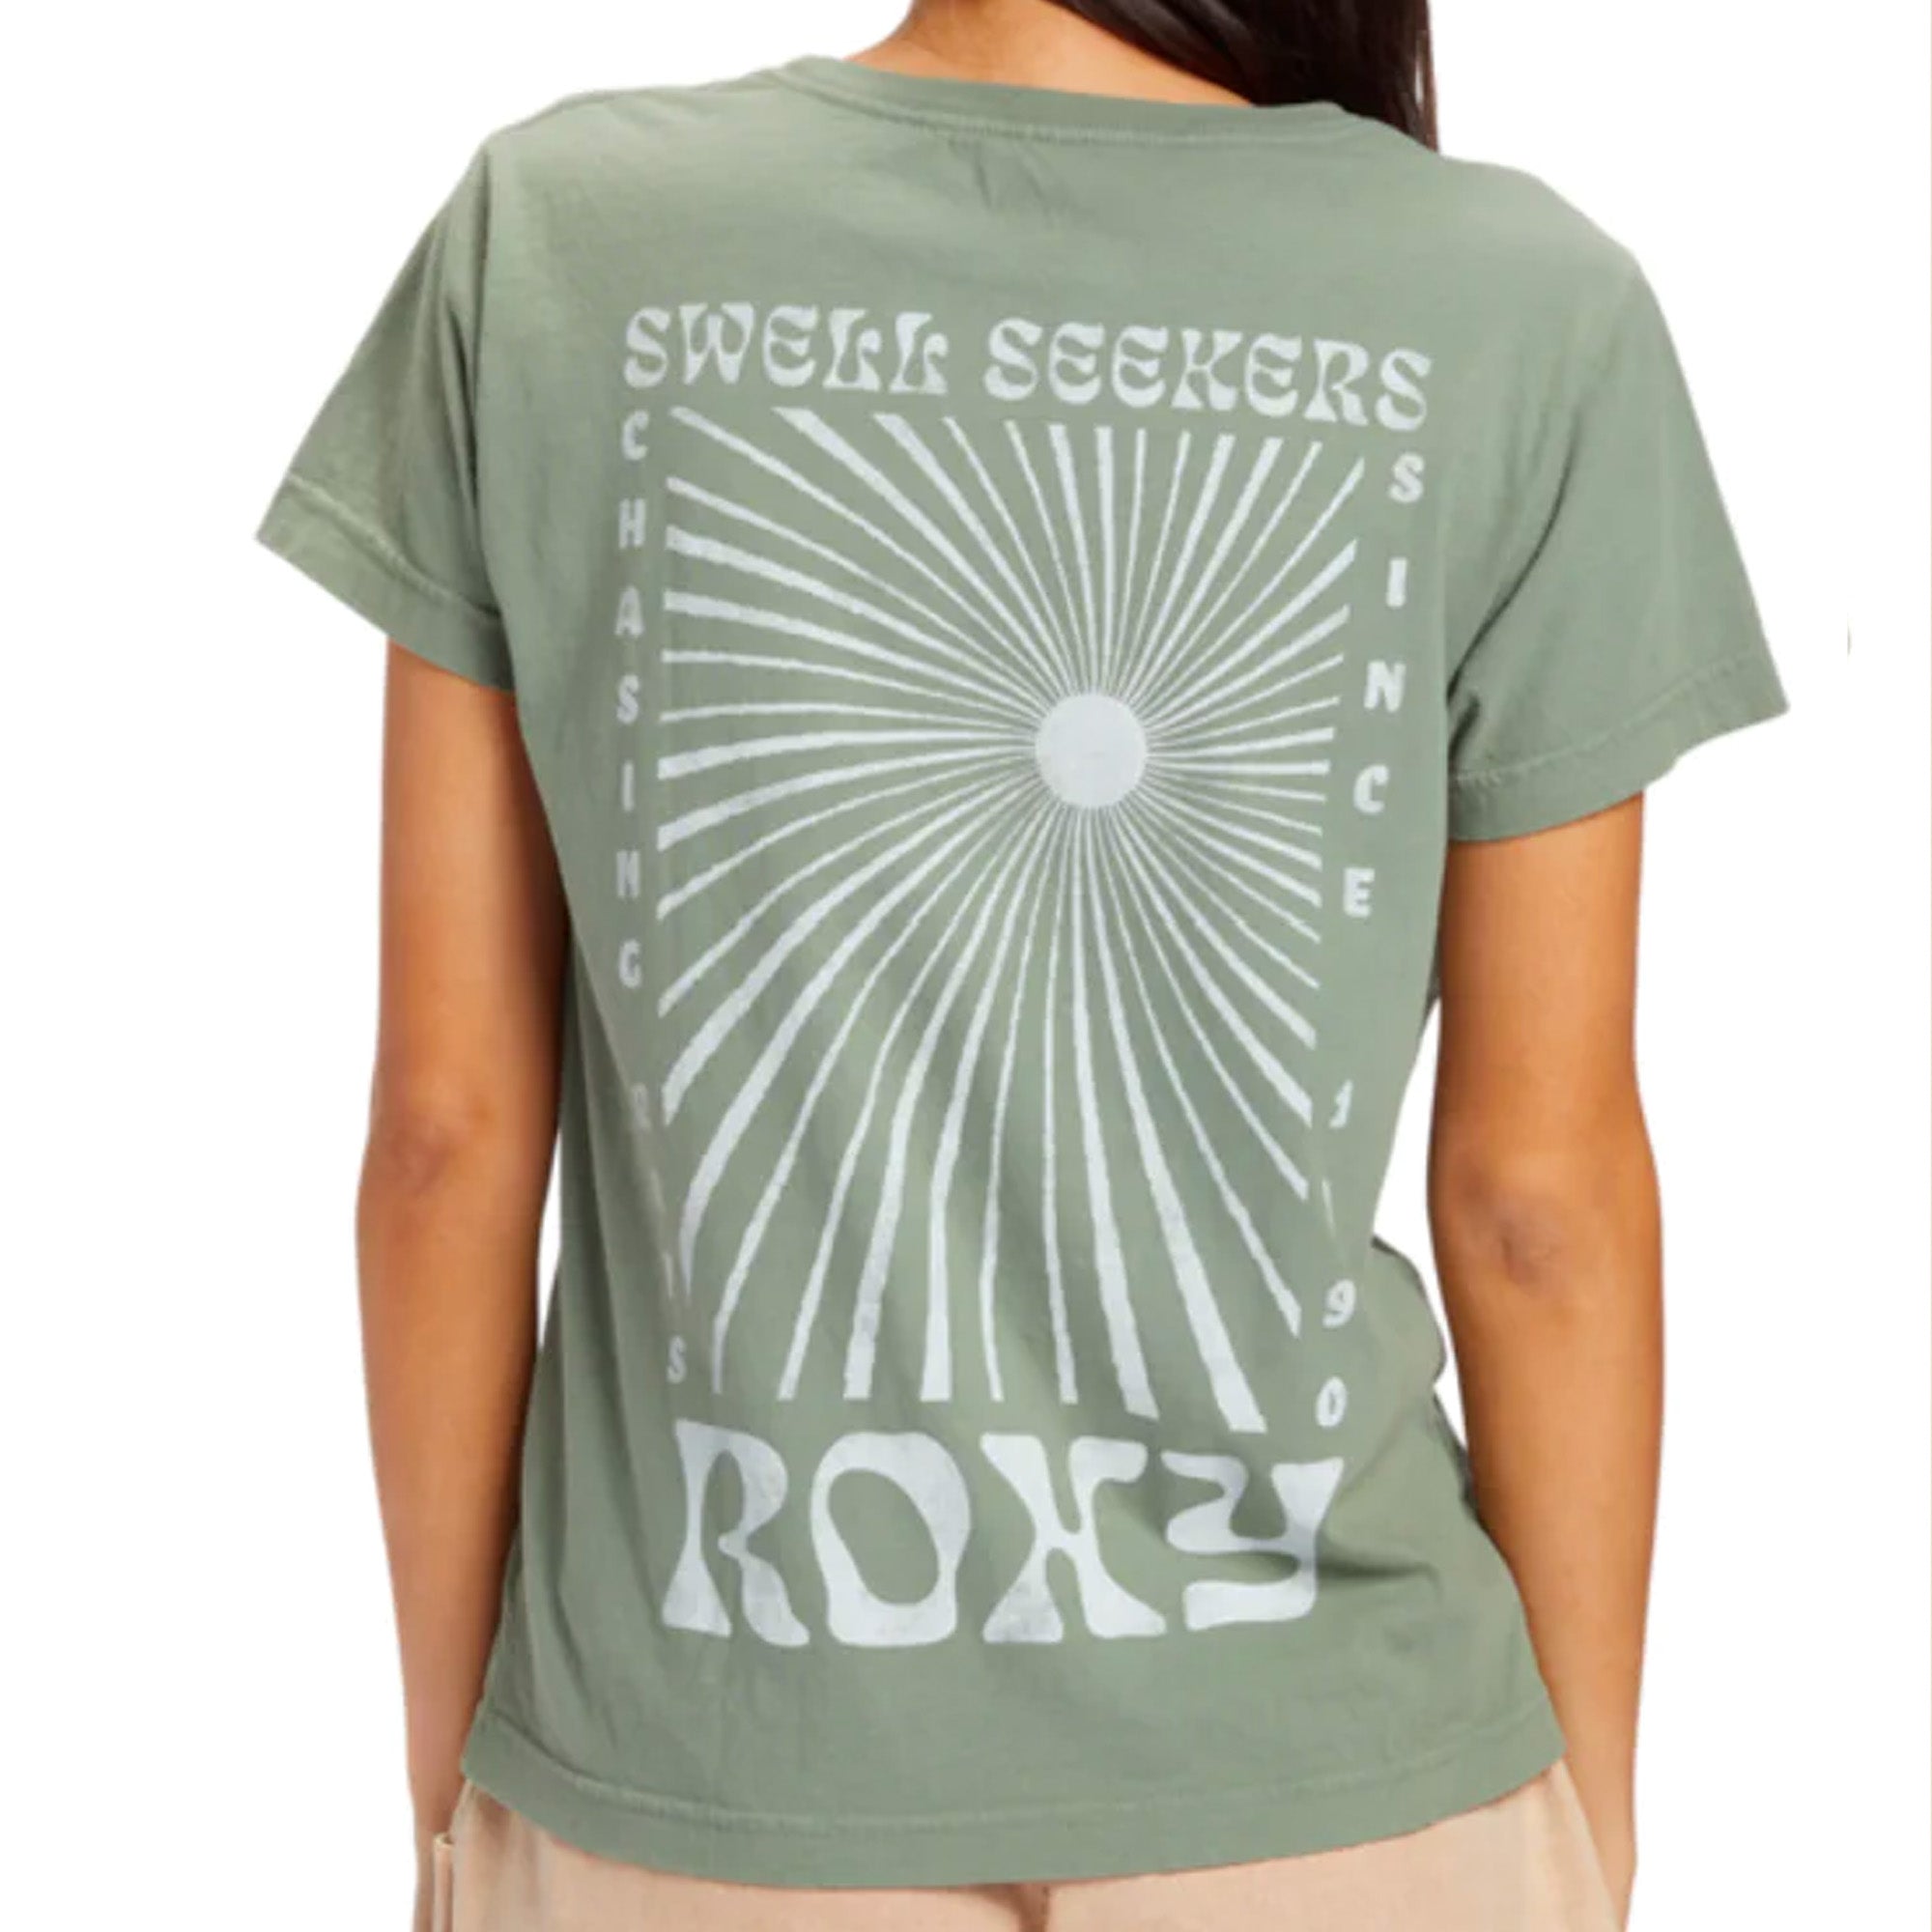 Roxy Swell Seakers Women's S/S Cropped T-Shirt